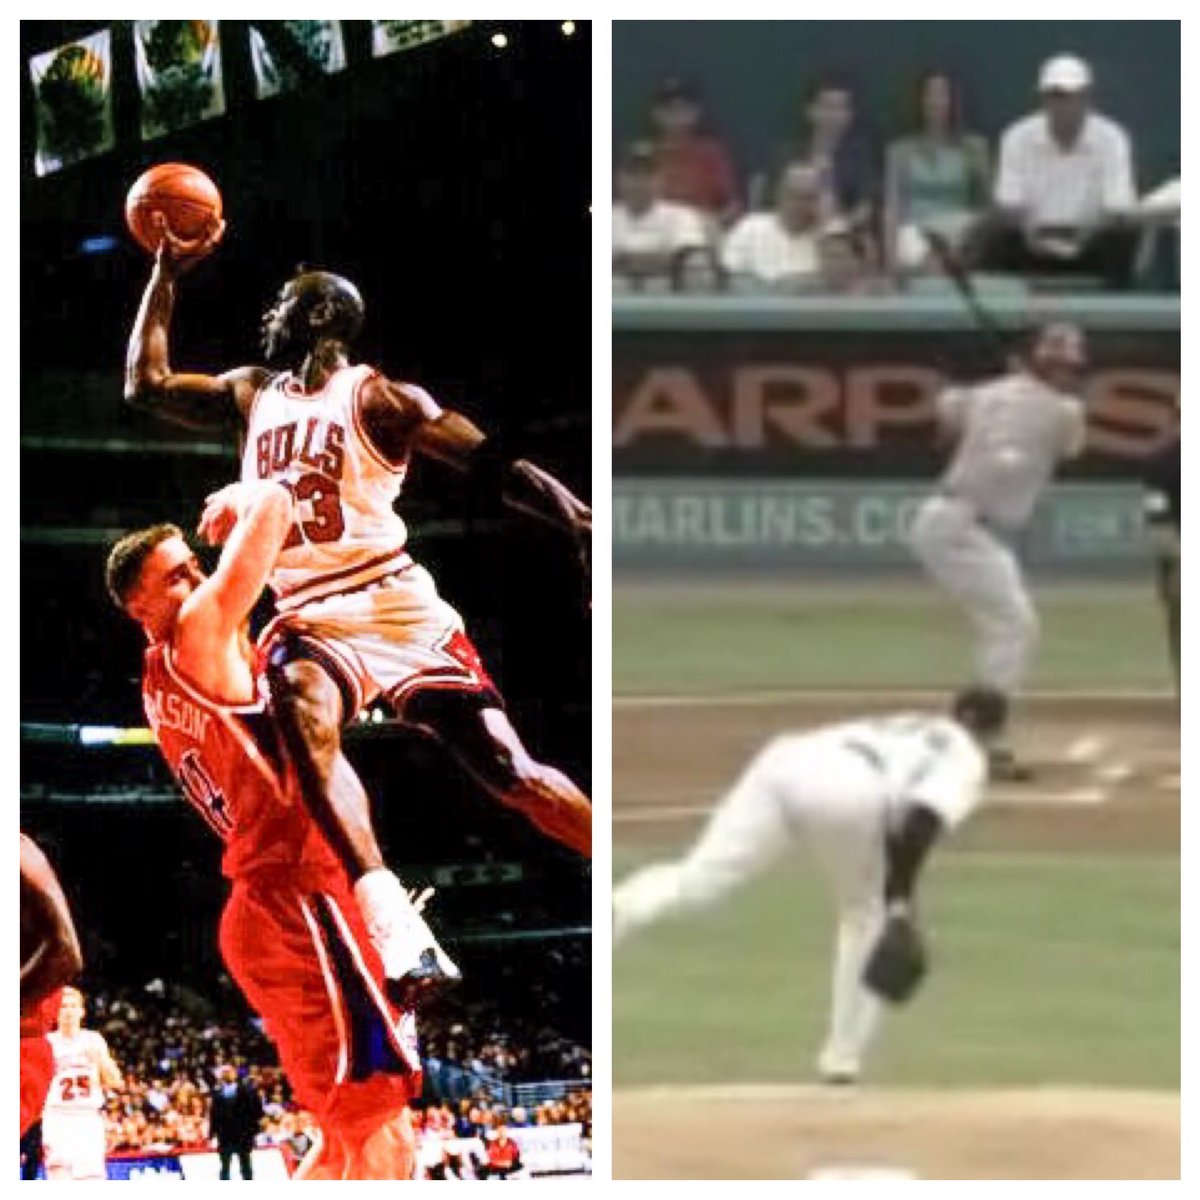 Franco had a MLB AB versus Mark Hendrickson who played for 4 different NBA teams (and starred in at least one Michael Jordan poster). Mark also surrendered Griffey’s 600th.Hendrickson is only person with a MLB win, MLB HR, and NBA 3-pointer